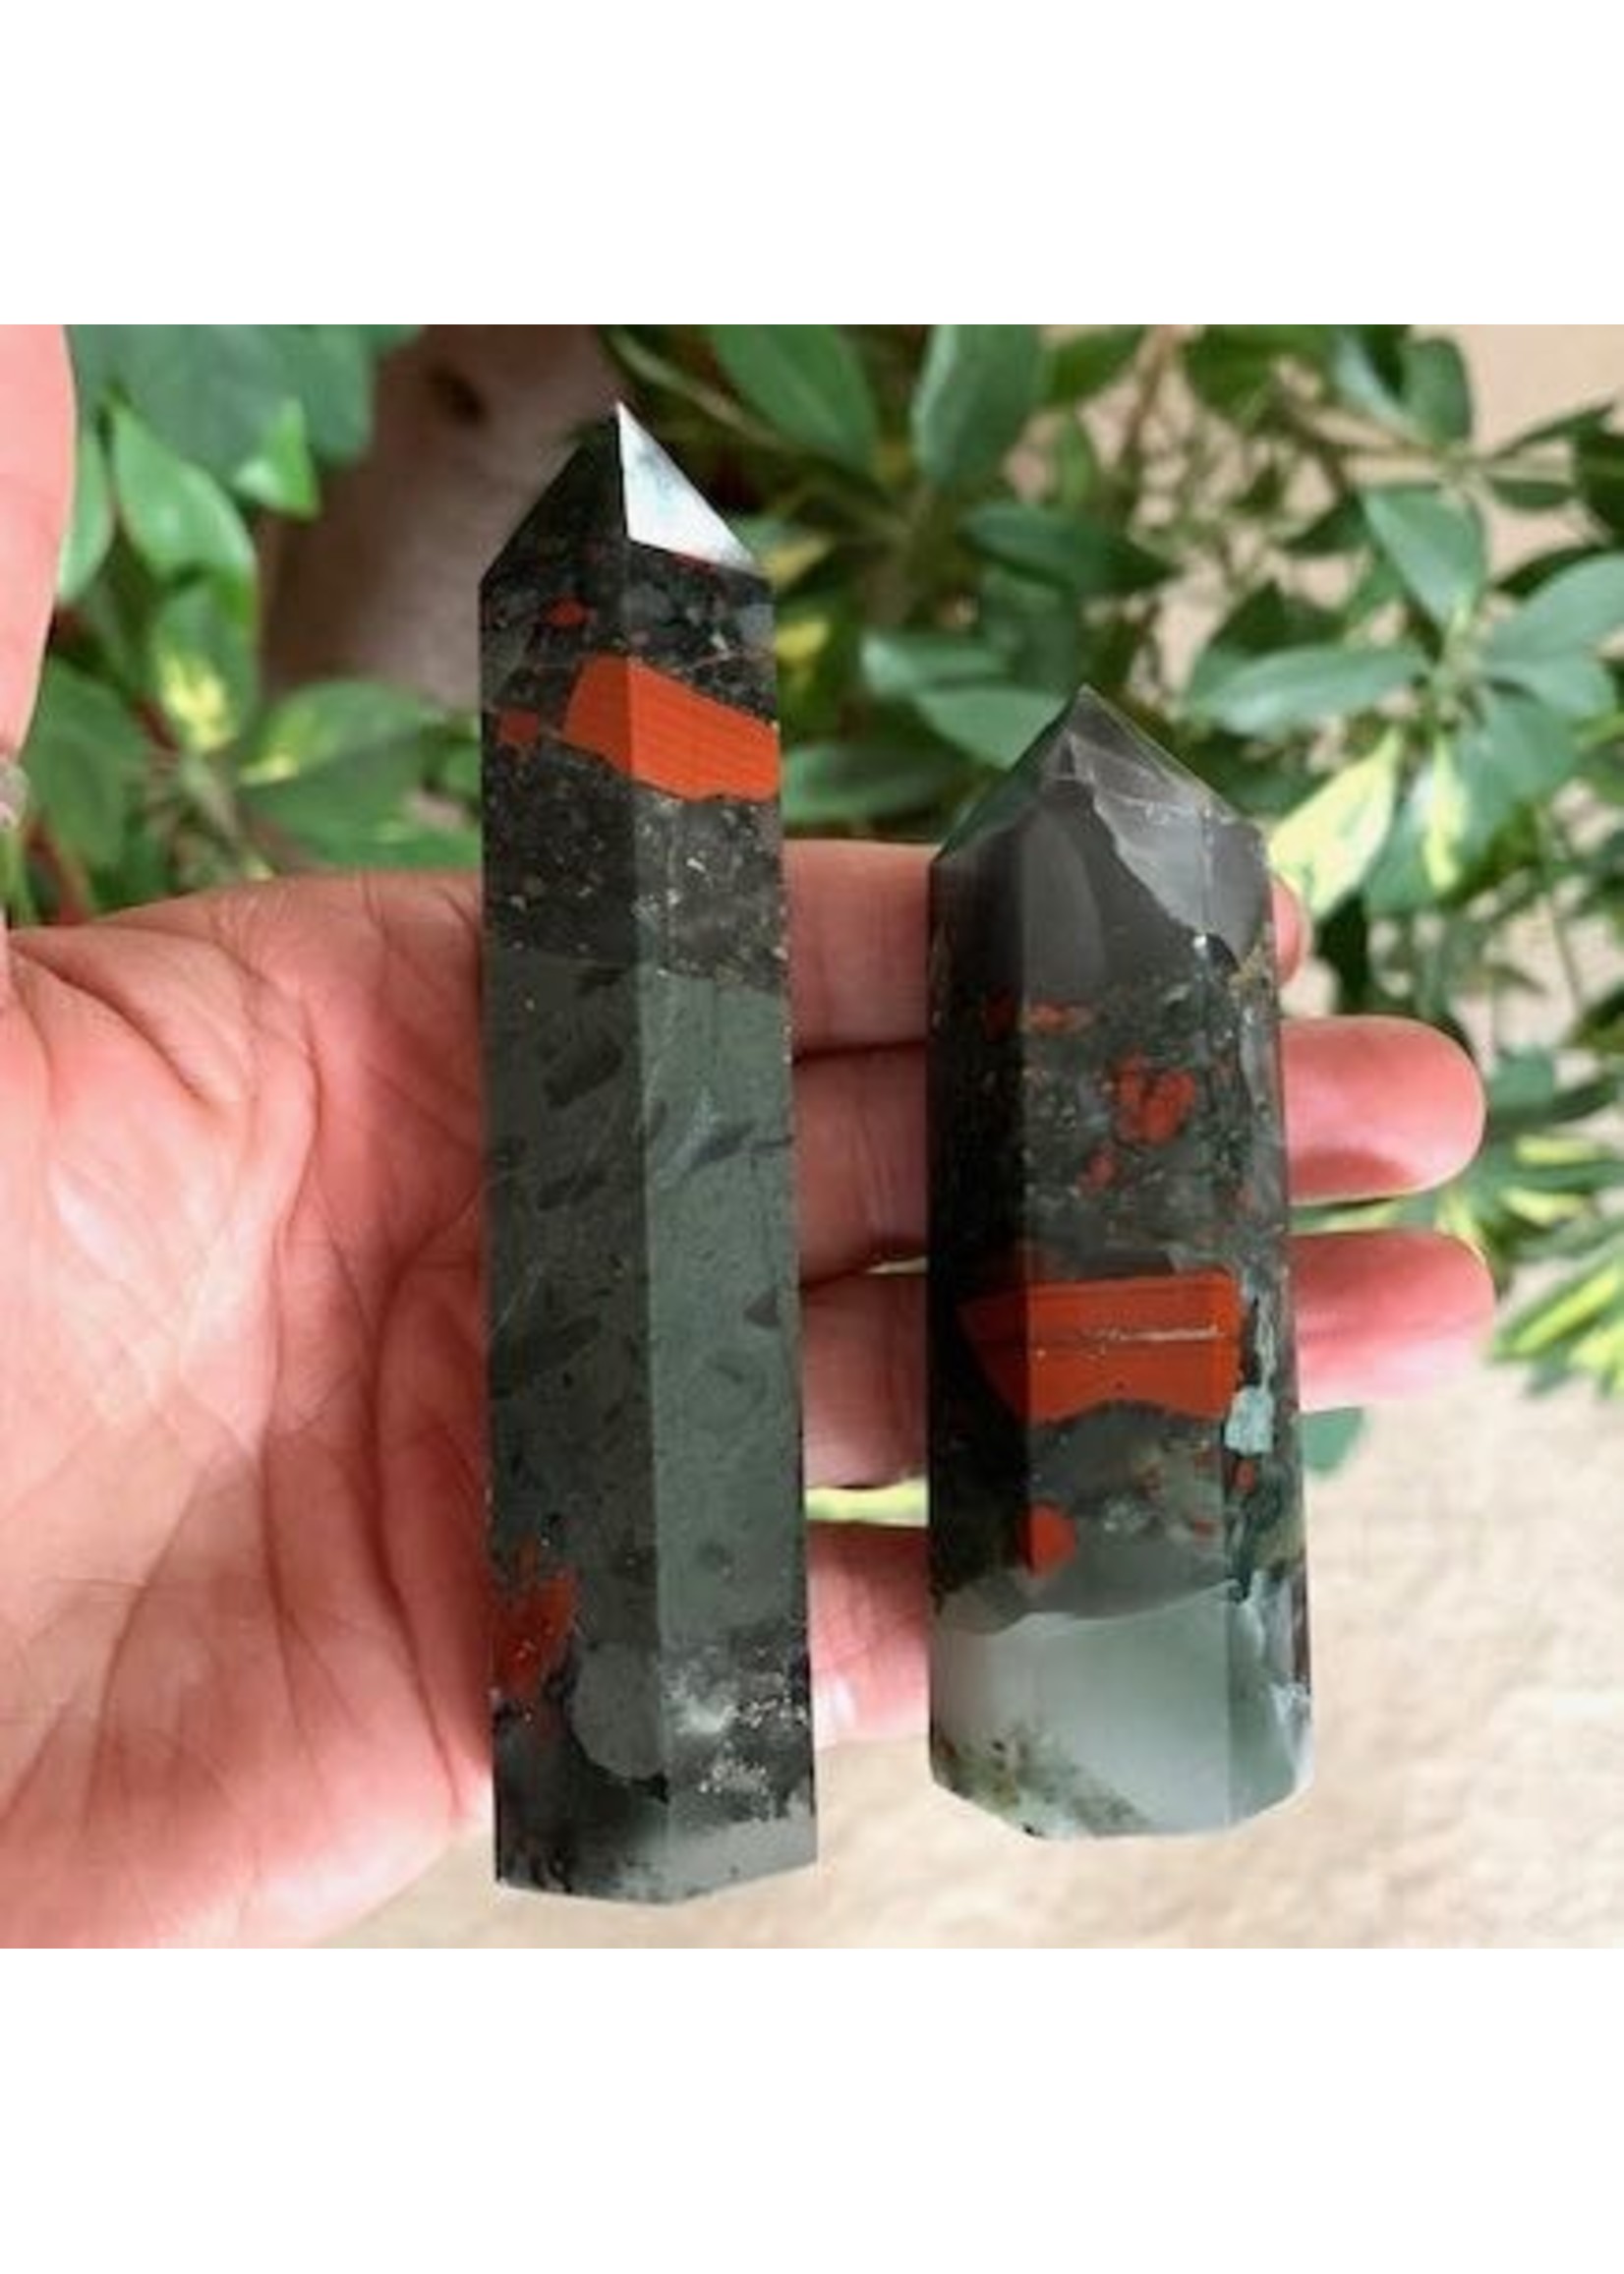 Bloodstone Generator for overall well-being